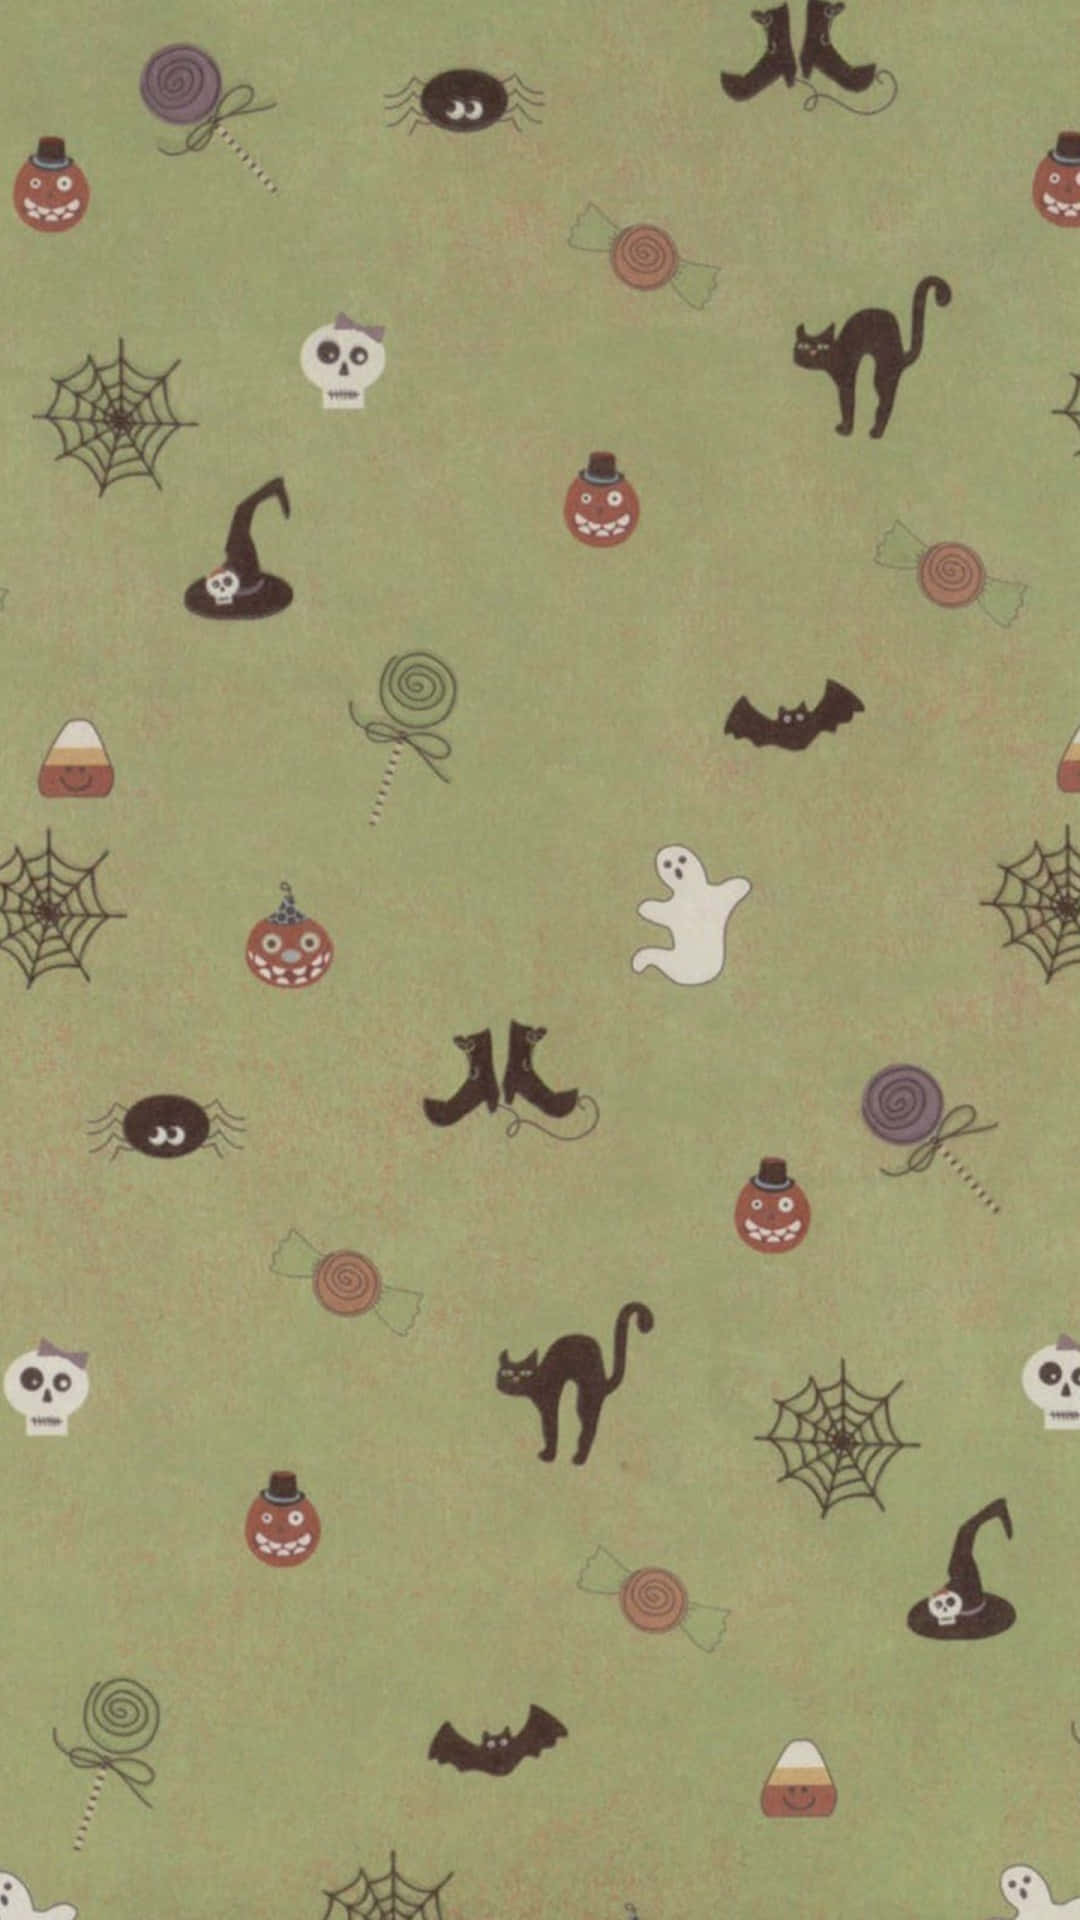 Celebrate Halloween with this frightfully fun smartphone background